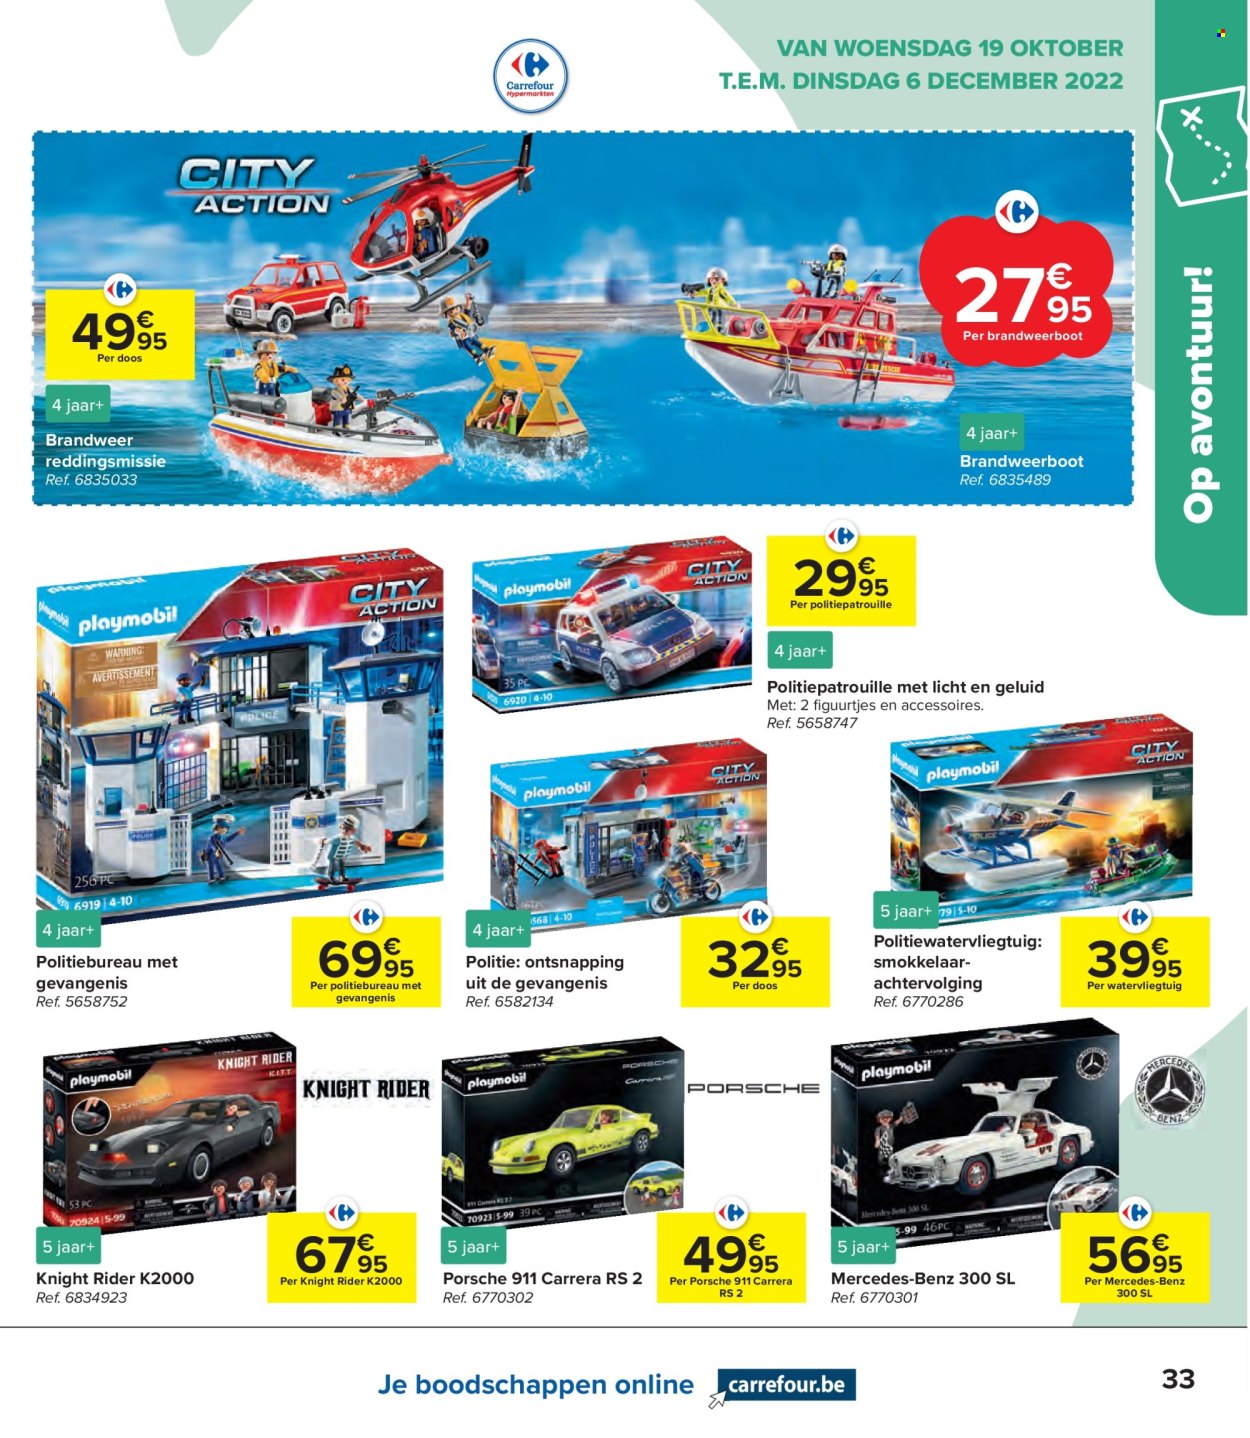 Catalogue Carrefour hypermarkt - 19.10.2022 - 6.12.2022. Page 33.